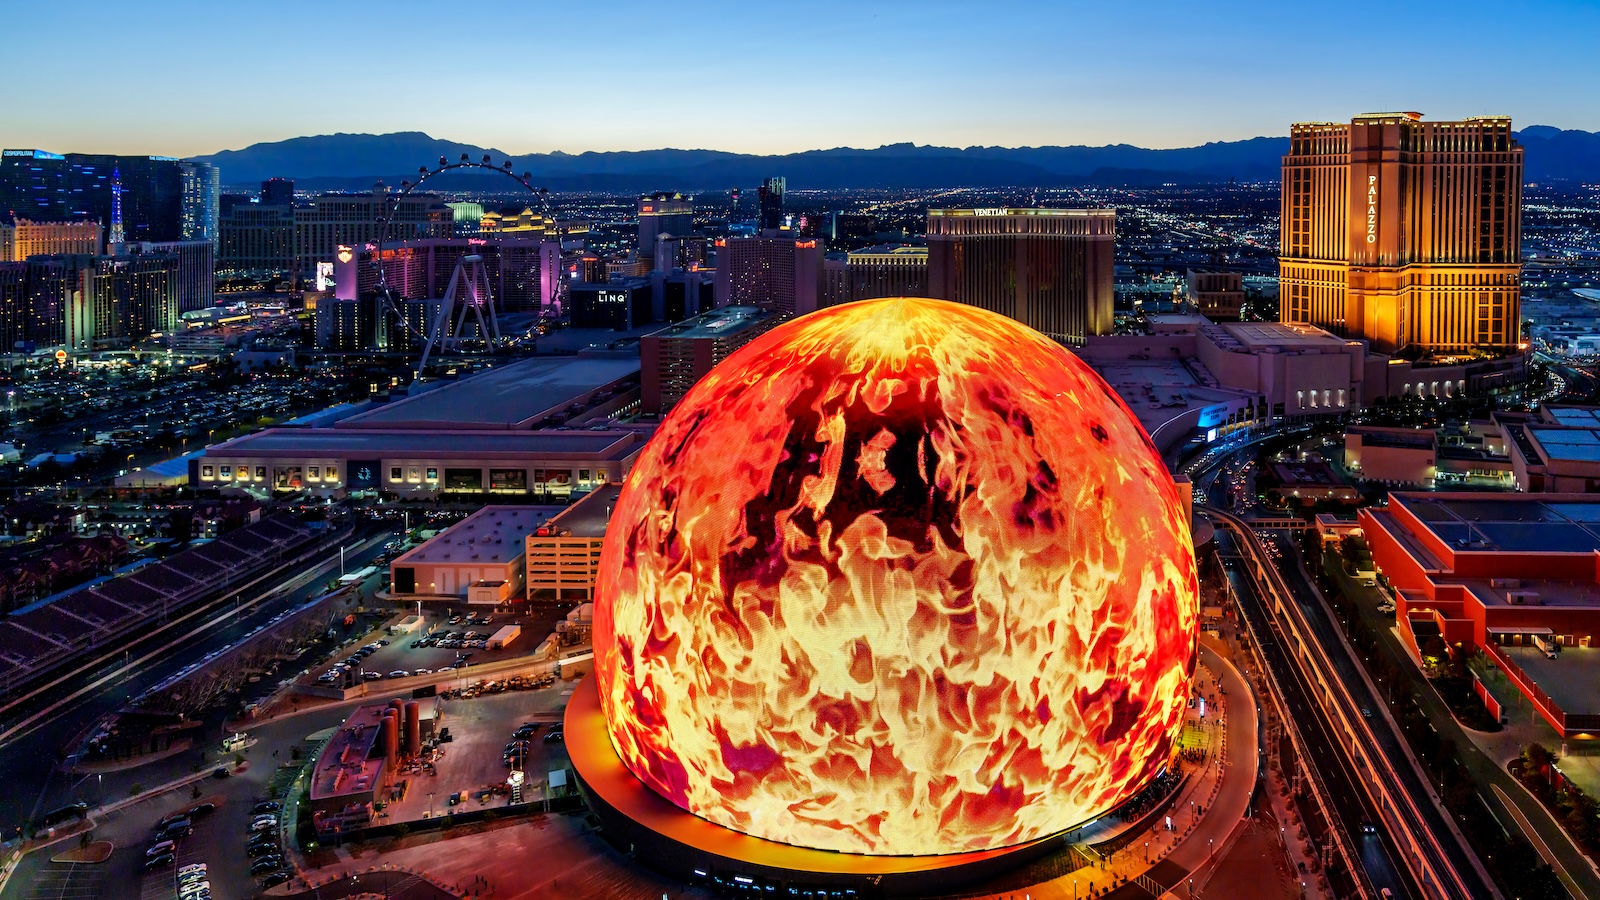 A skyline shot of Las Vegas. The Sphere in the foreground features a 360-degree outdoor screen showing fire.